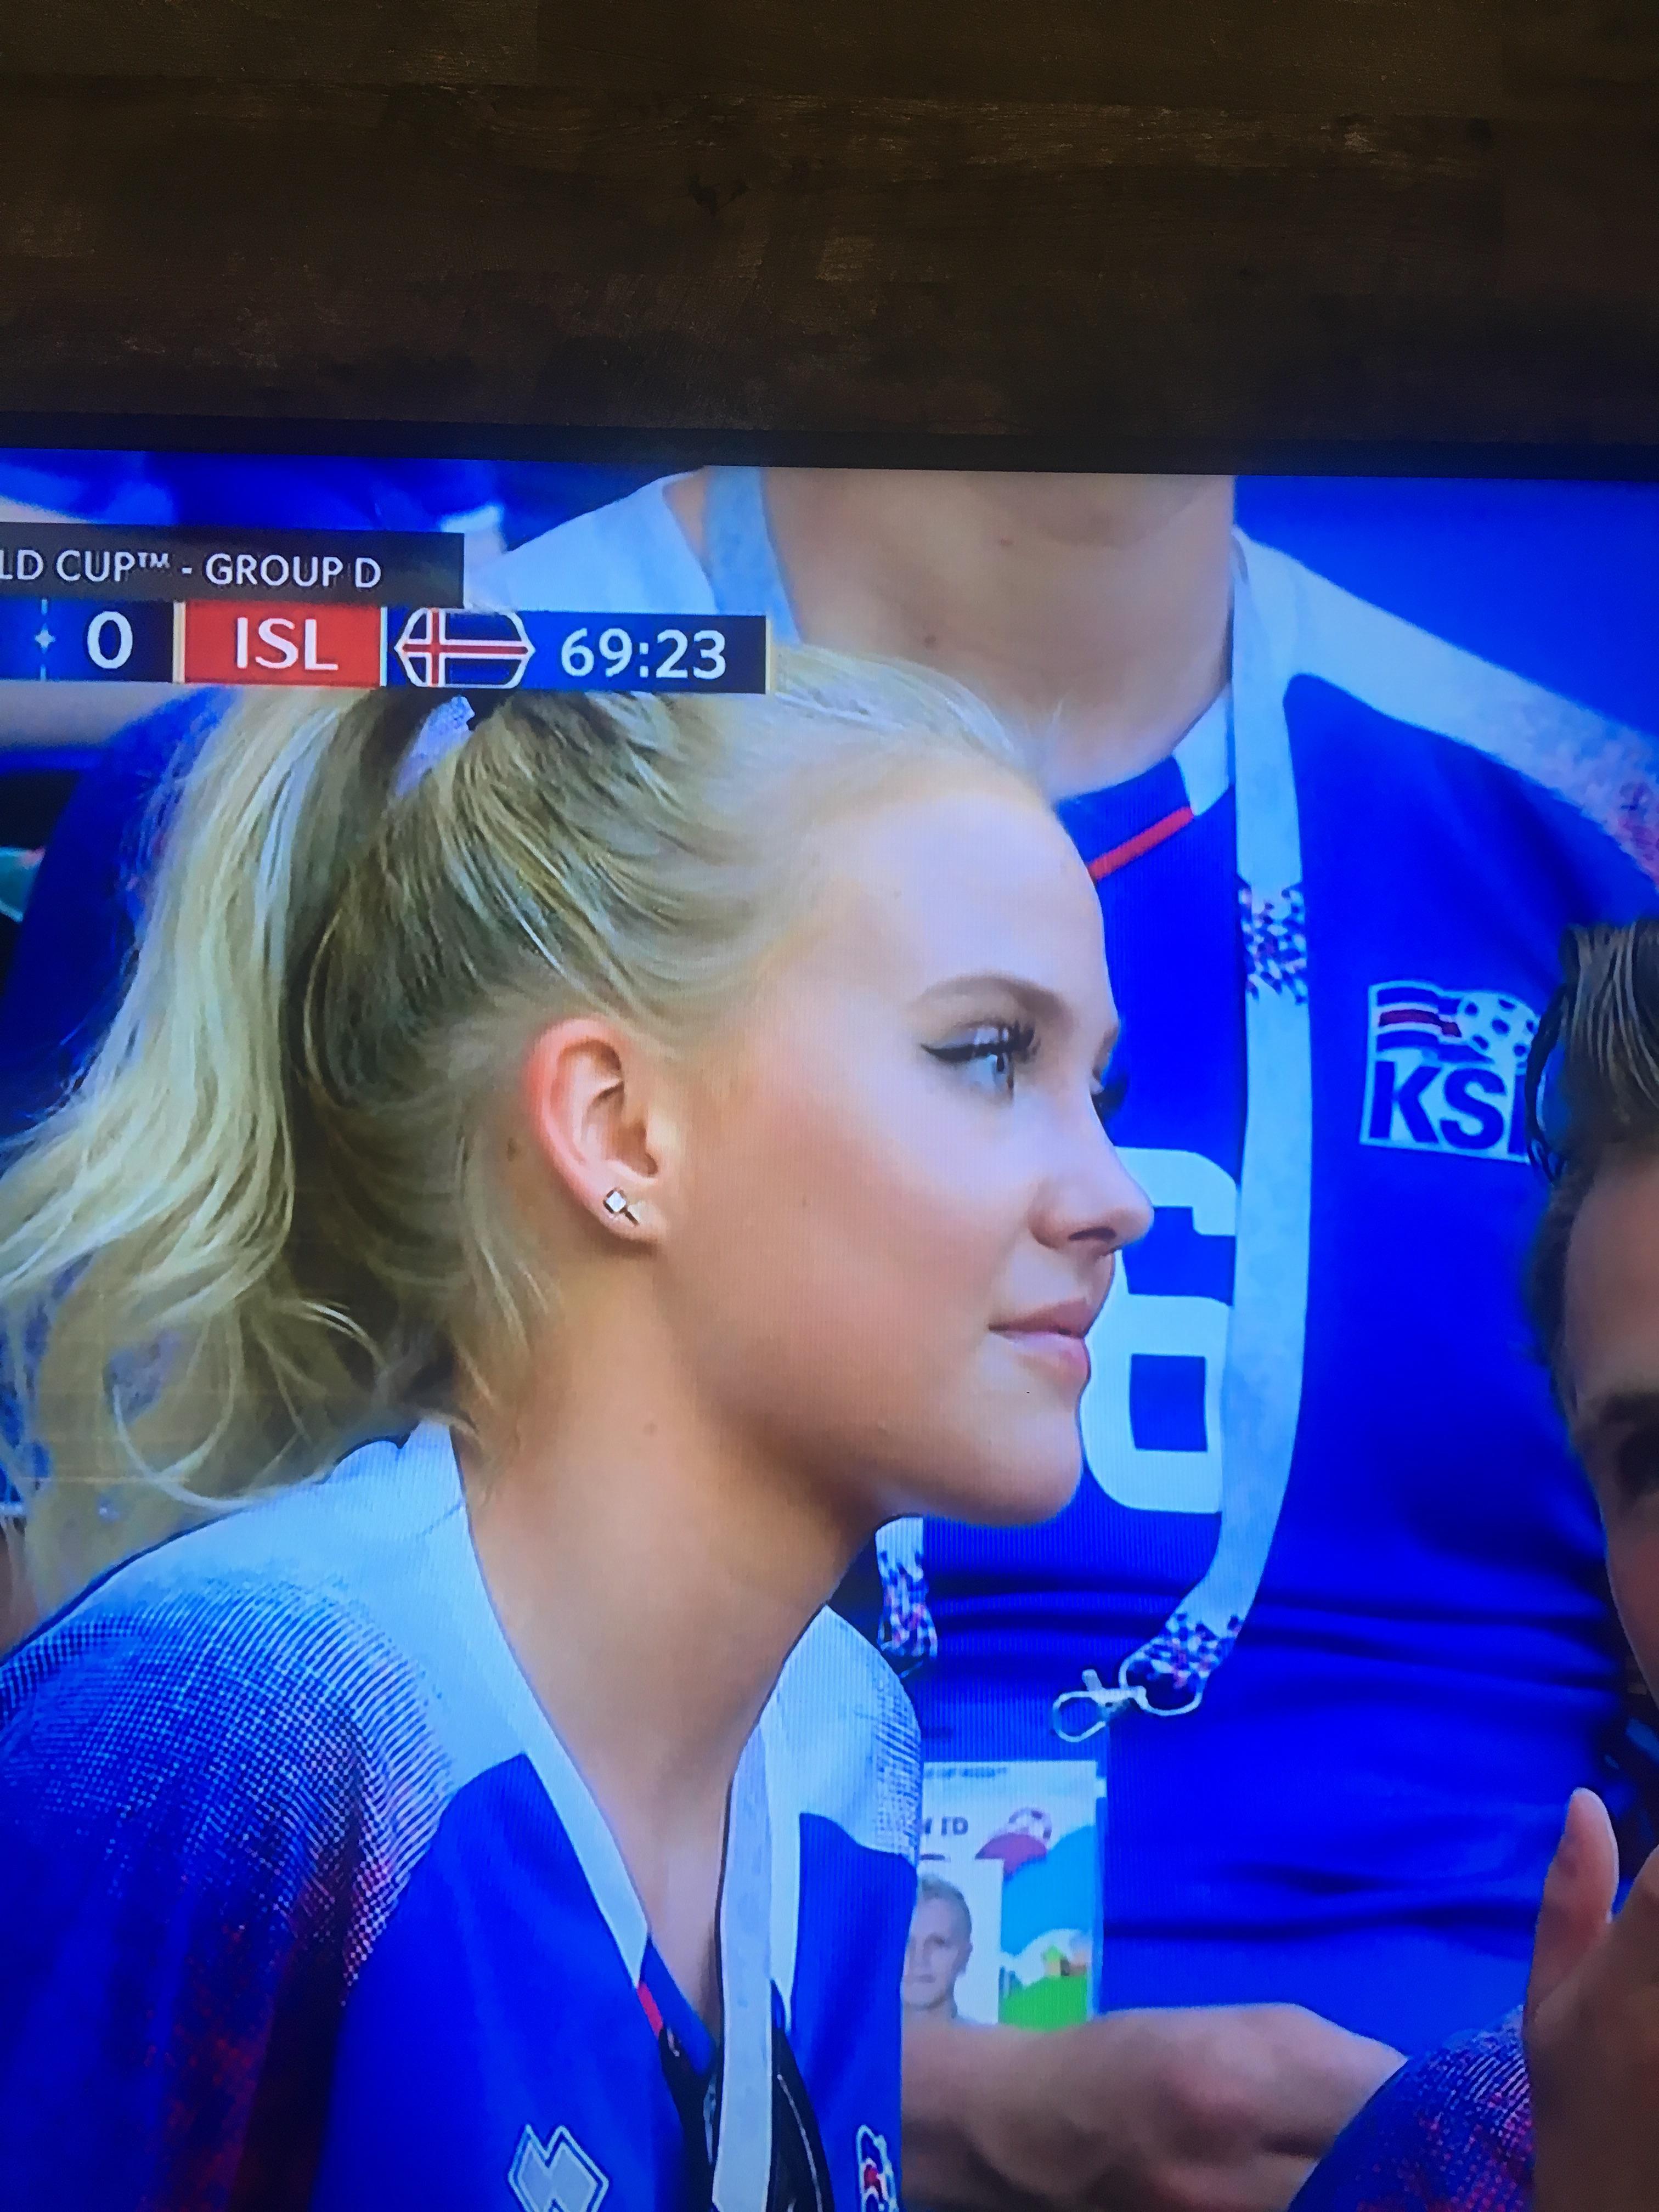 Icelandic Goddess at the World Cup